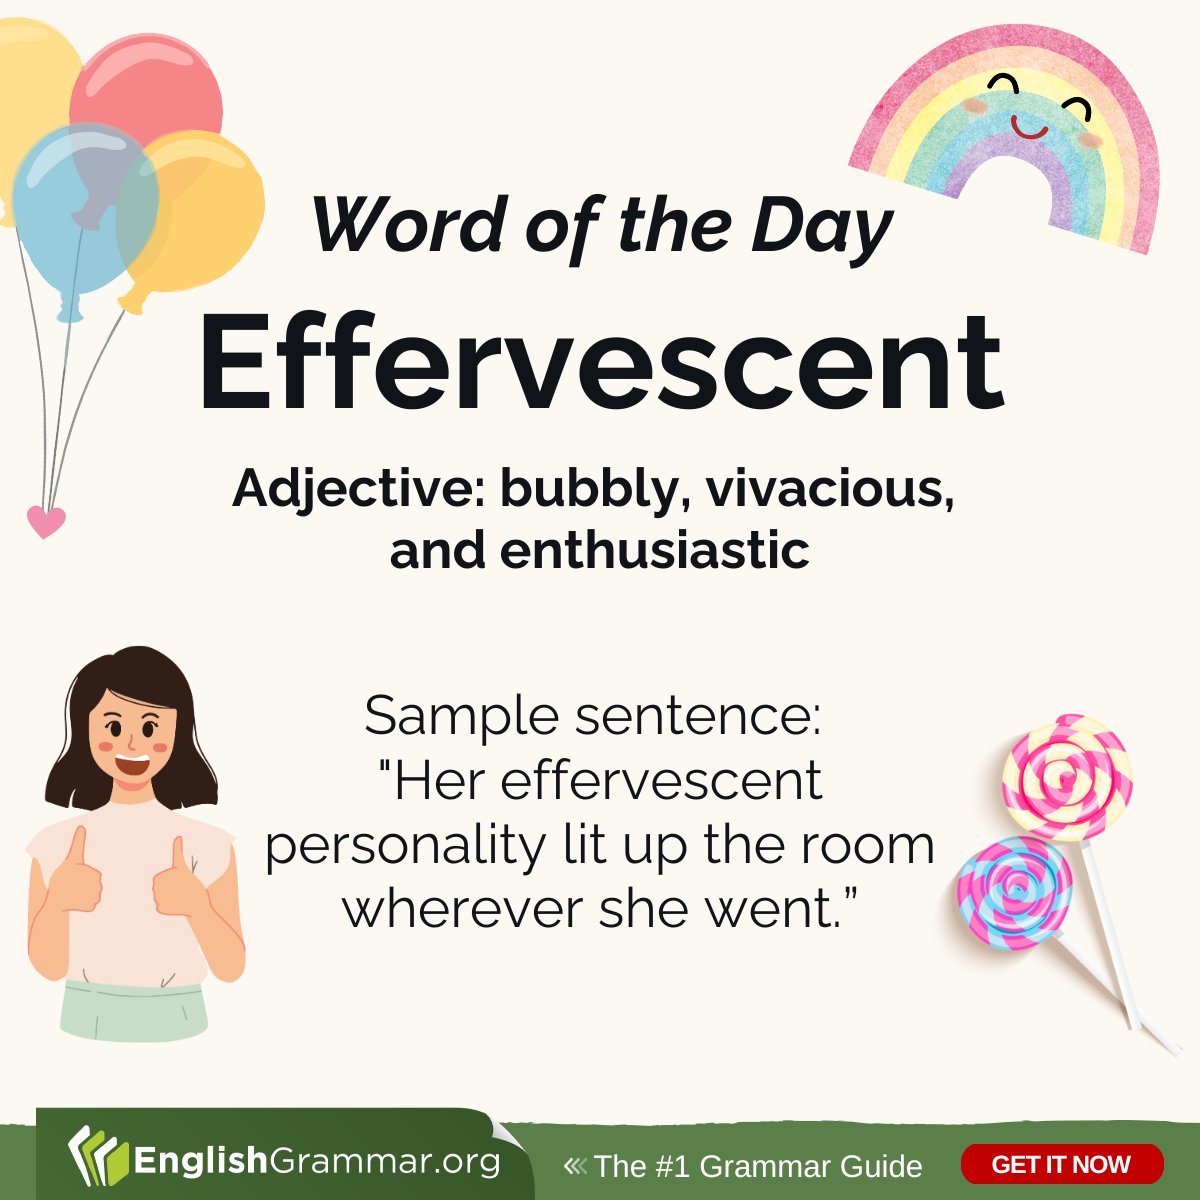 What does 'effervescent' mean? #vocabulary #writing #amwriting